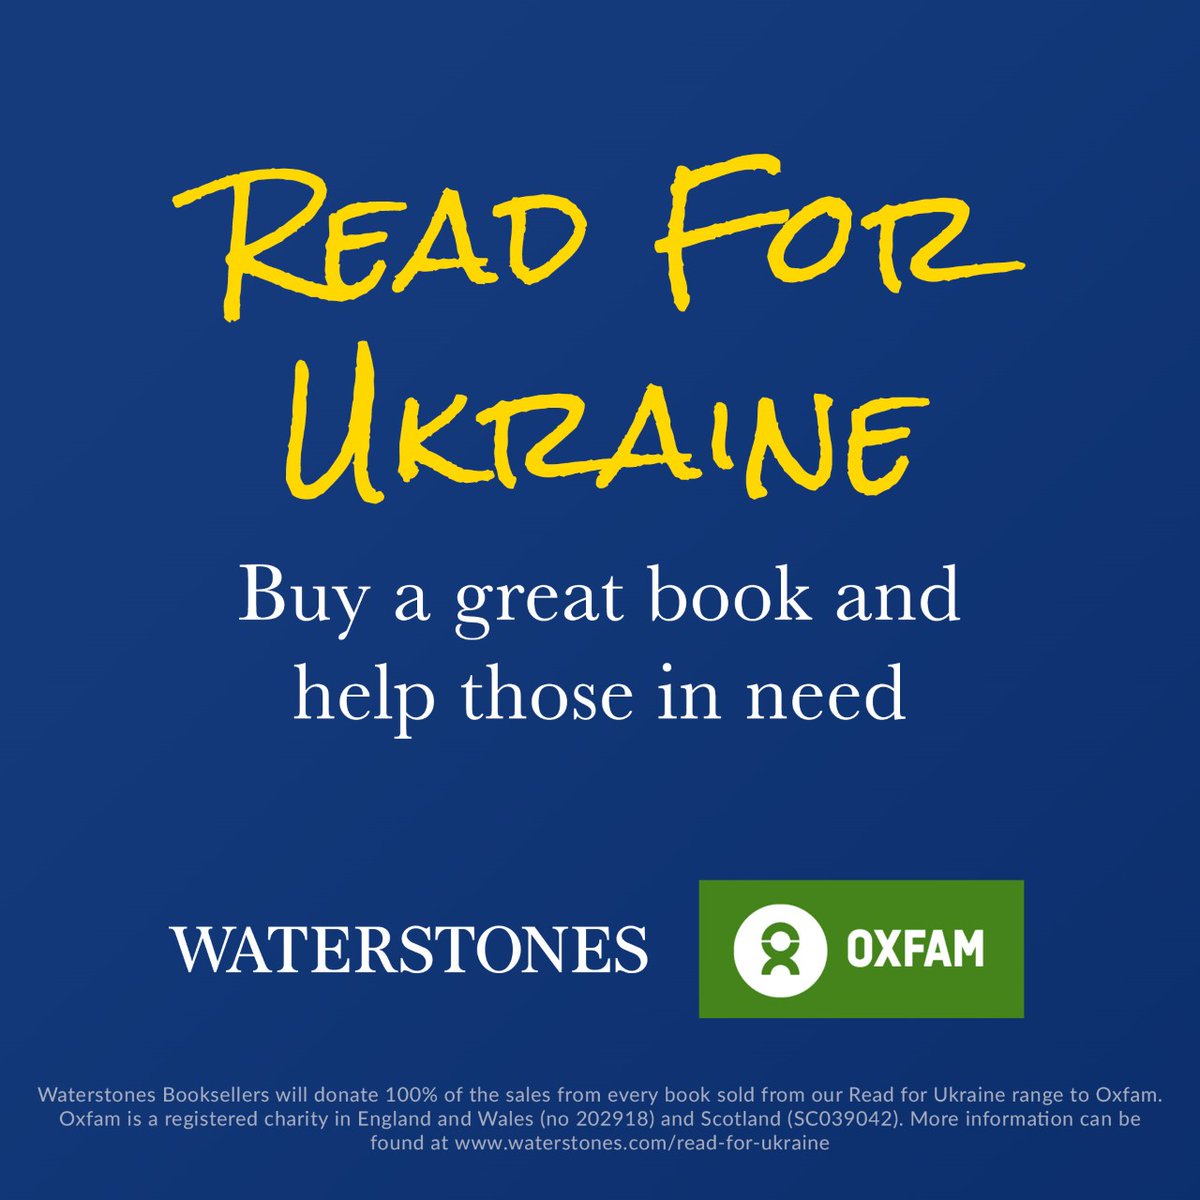 How can we help those affected by the conflict in Ukraine? Many have asked, so we’ve started #ReadForUkraine, a curated selection of books with 100% of sales going to support the work of @oxfamgb - your next great read could also make a real difference: bit.ly/ReadForUkraine